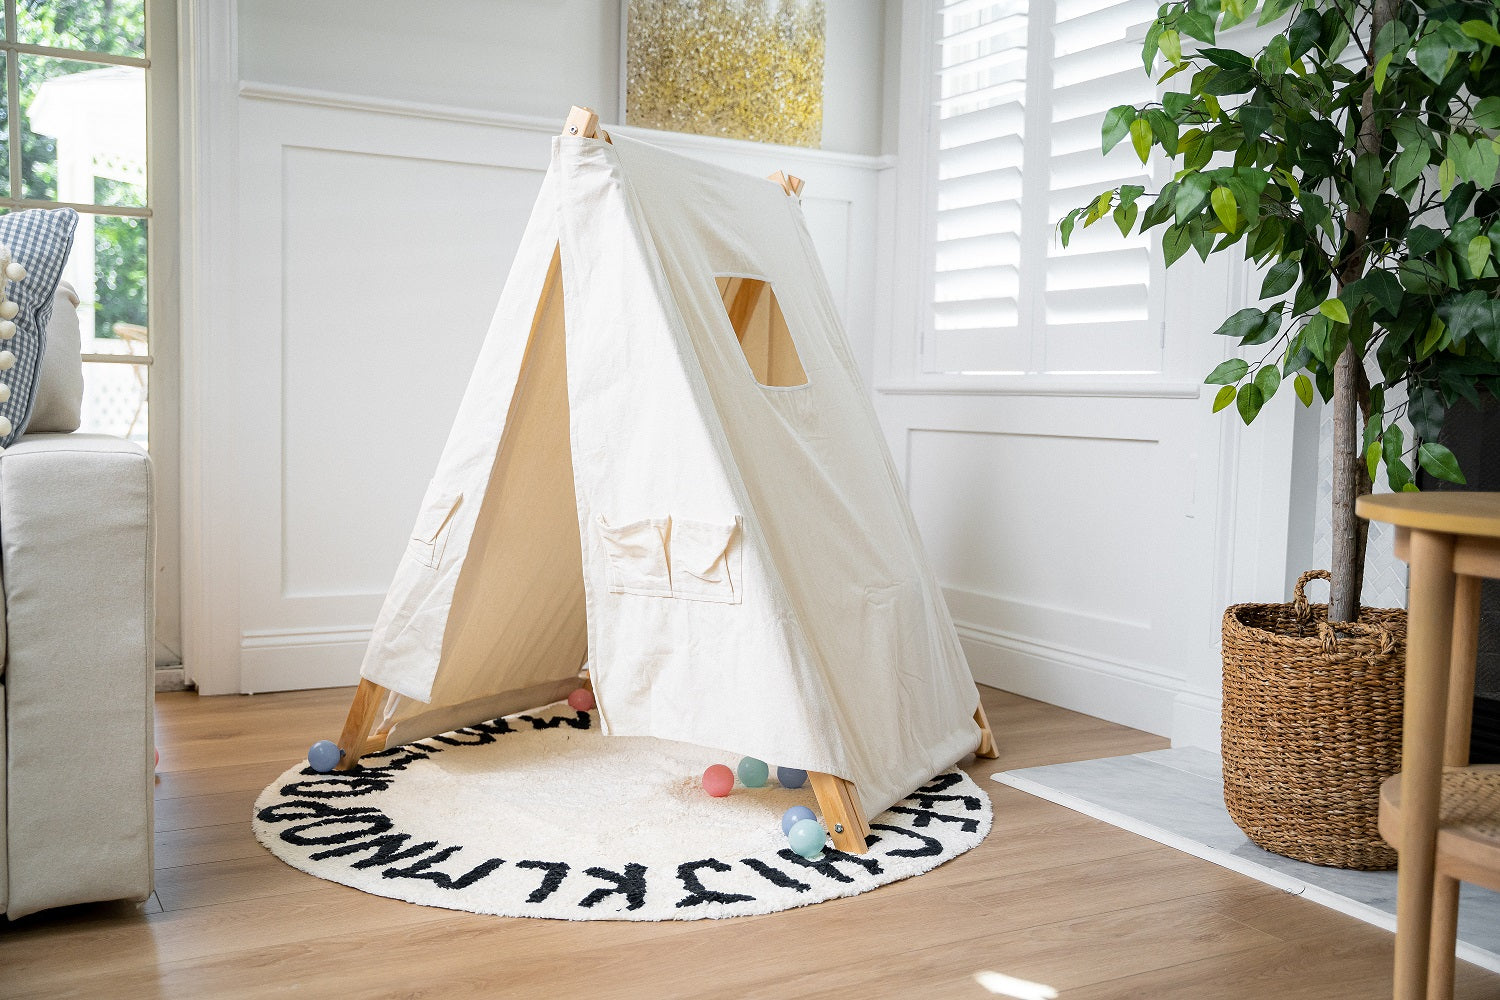 Tent Covering For Spruce - Baby and Toddler Foldable Swing Set - Swing Set Sold Separately